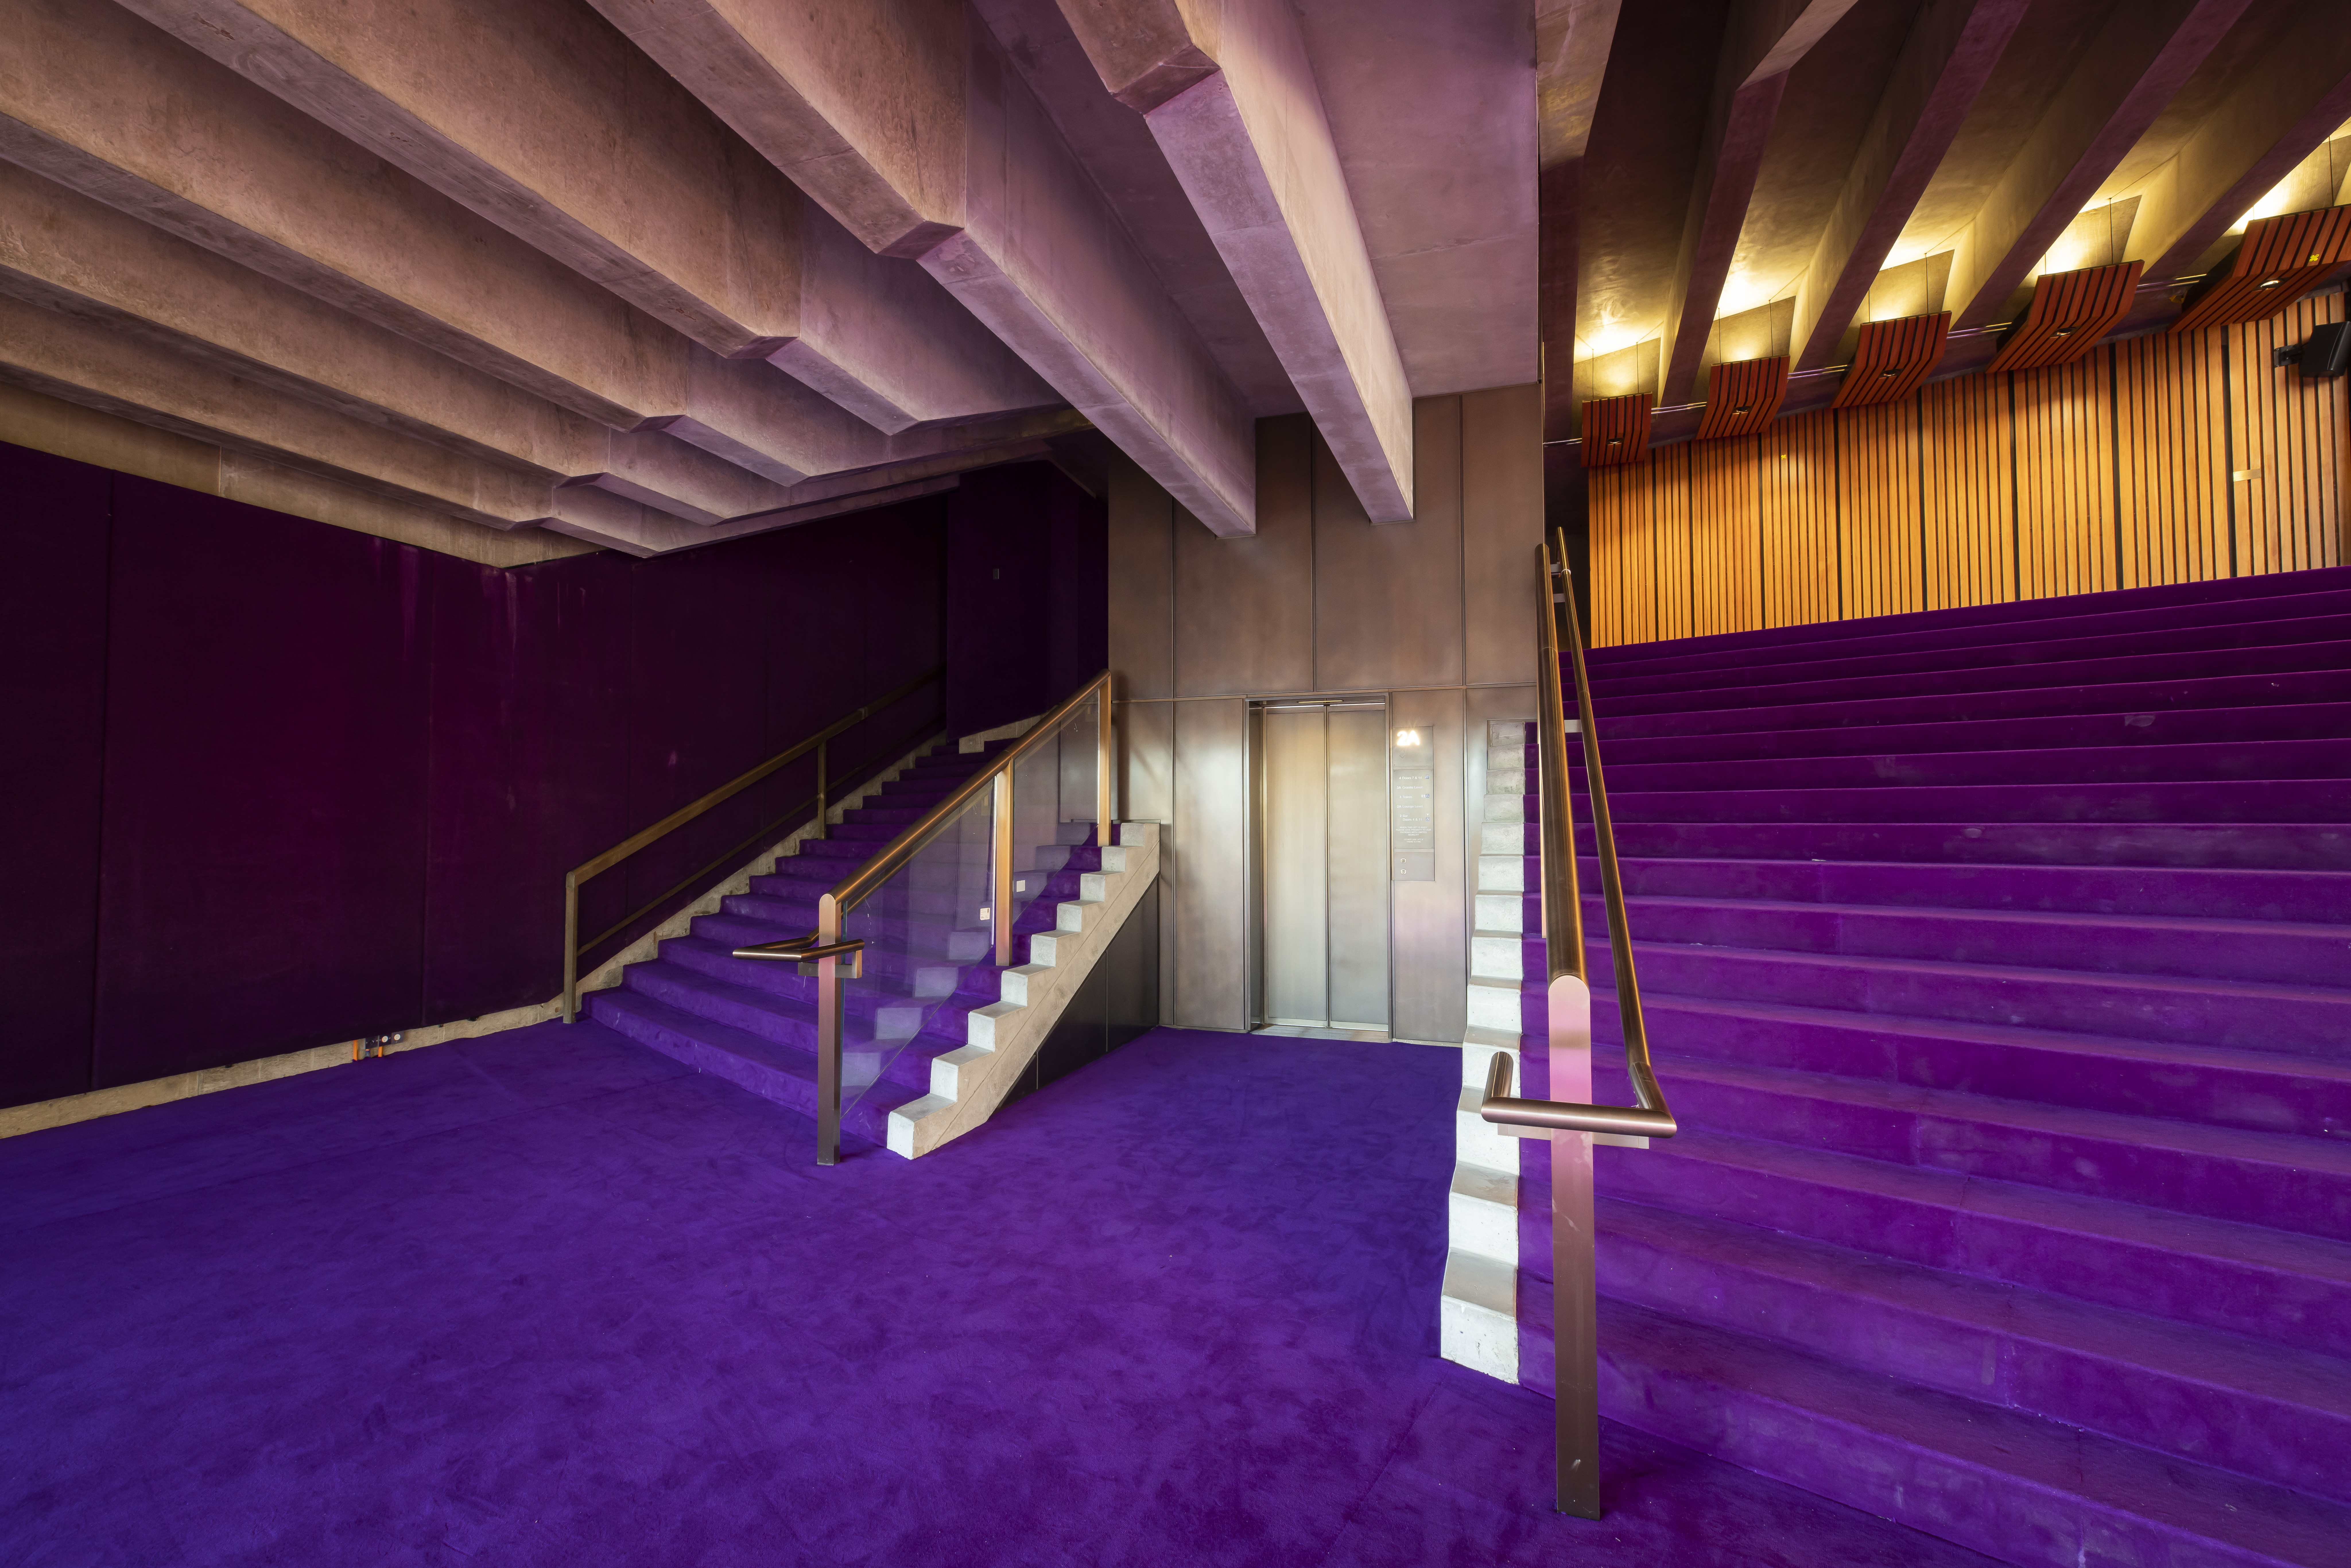 A lift and two staircases beside it with purple carpet.